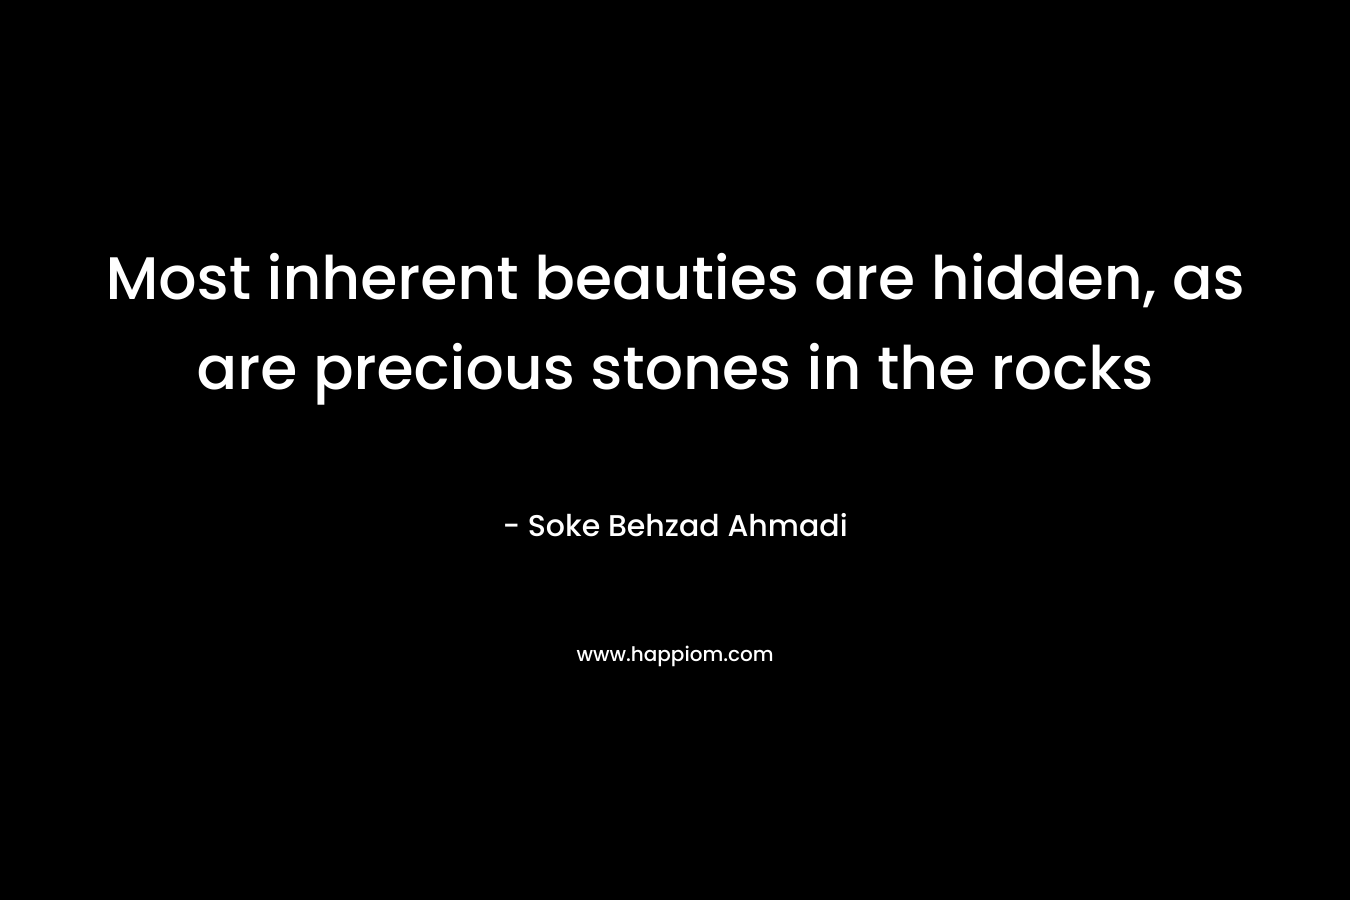 Most inherent beauties are hidden, as are precious stones in the rocks – Soke Behzad Ahmadi